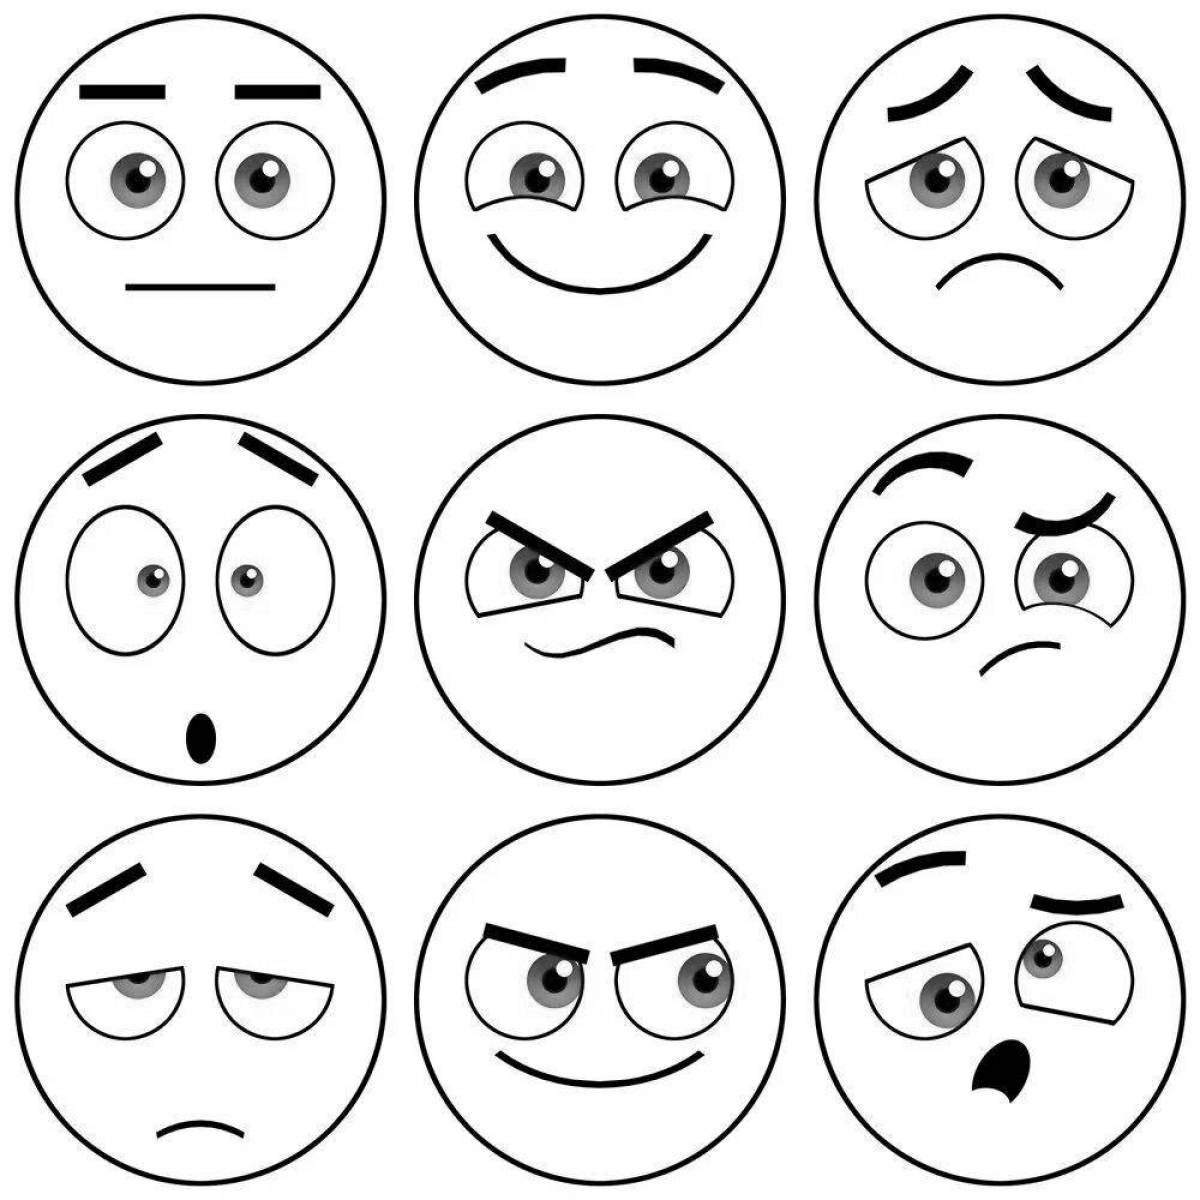 Excited emotions coloring pages for preschoolers